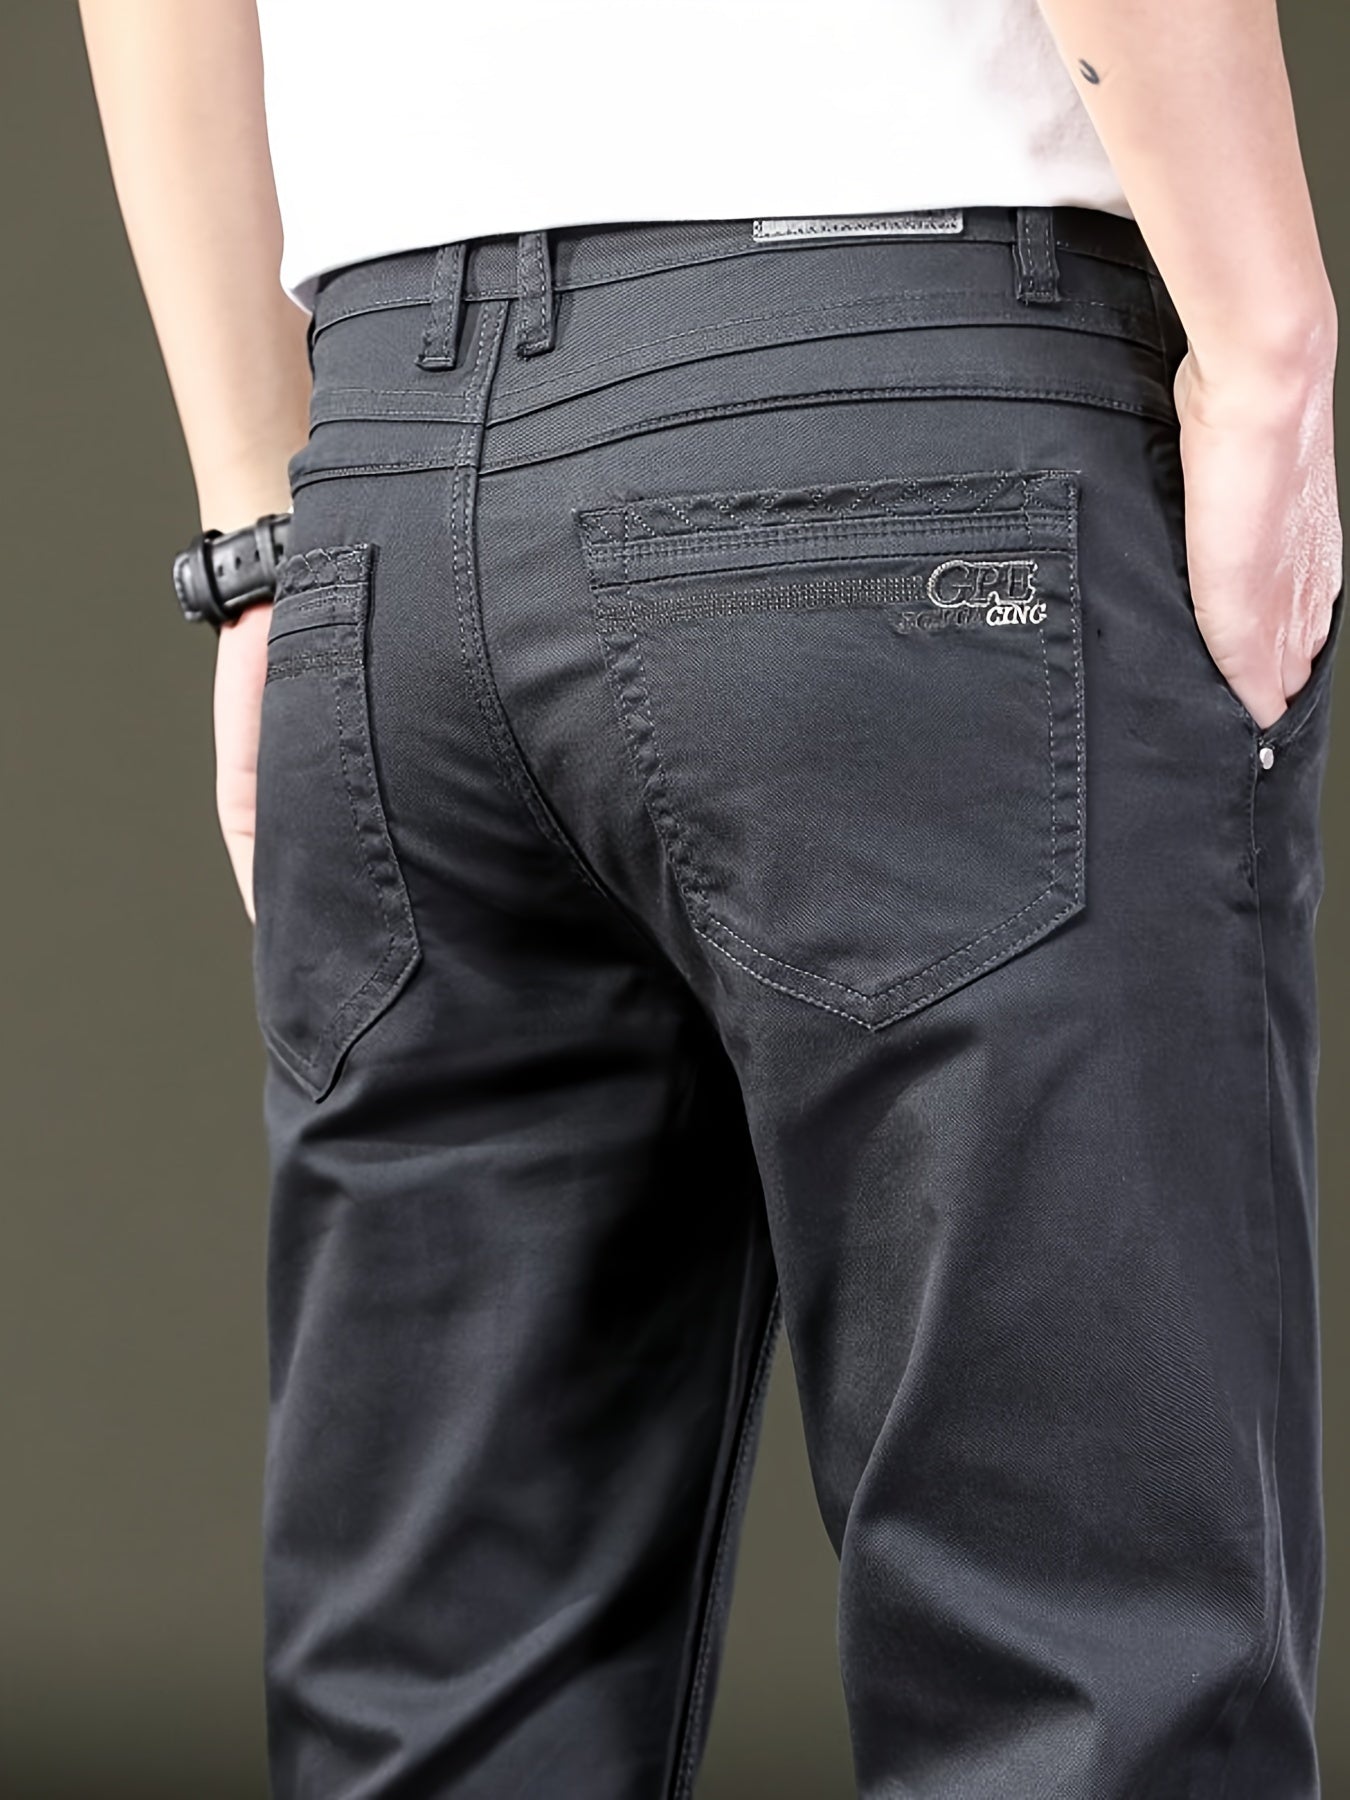 Casual Solid Men's Cotton Comfy Pants With Multi-pocket For All Seasons, Men's Leisurewear